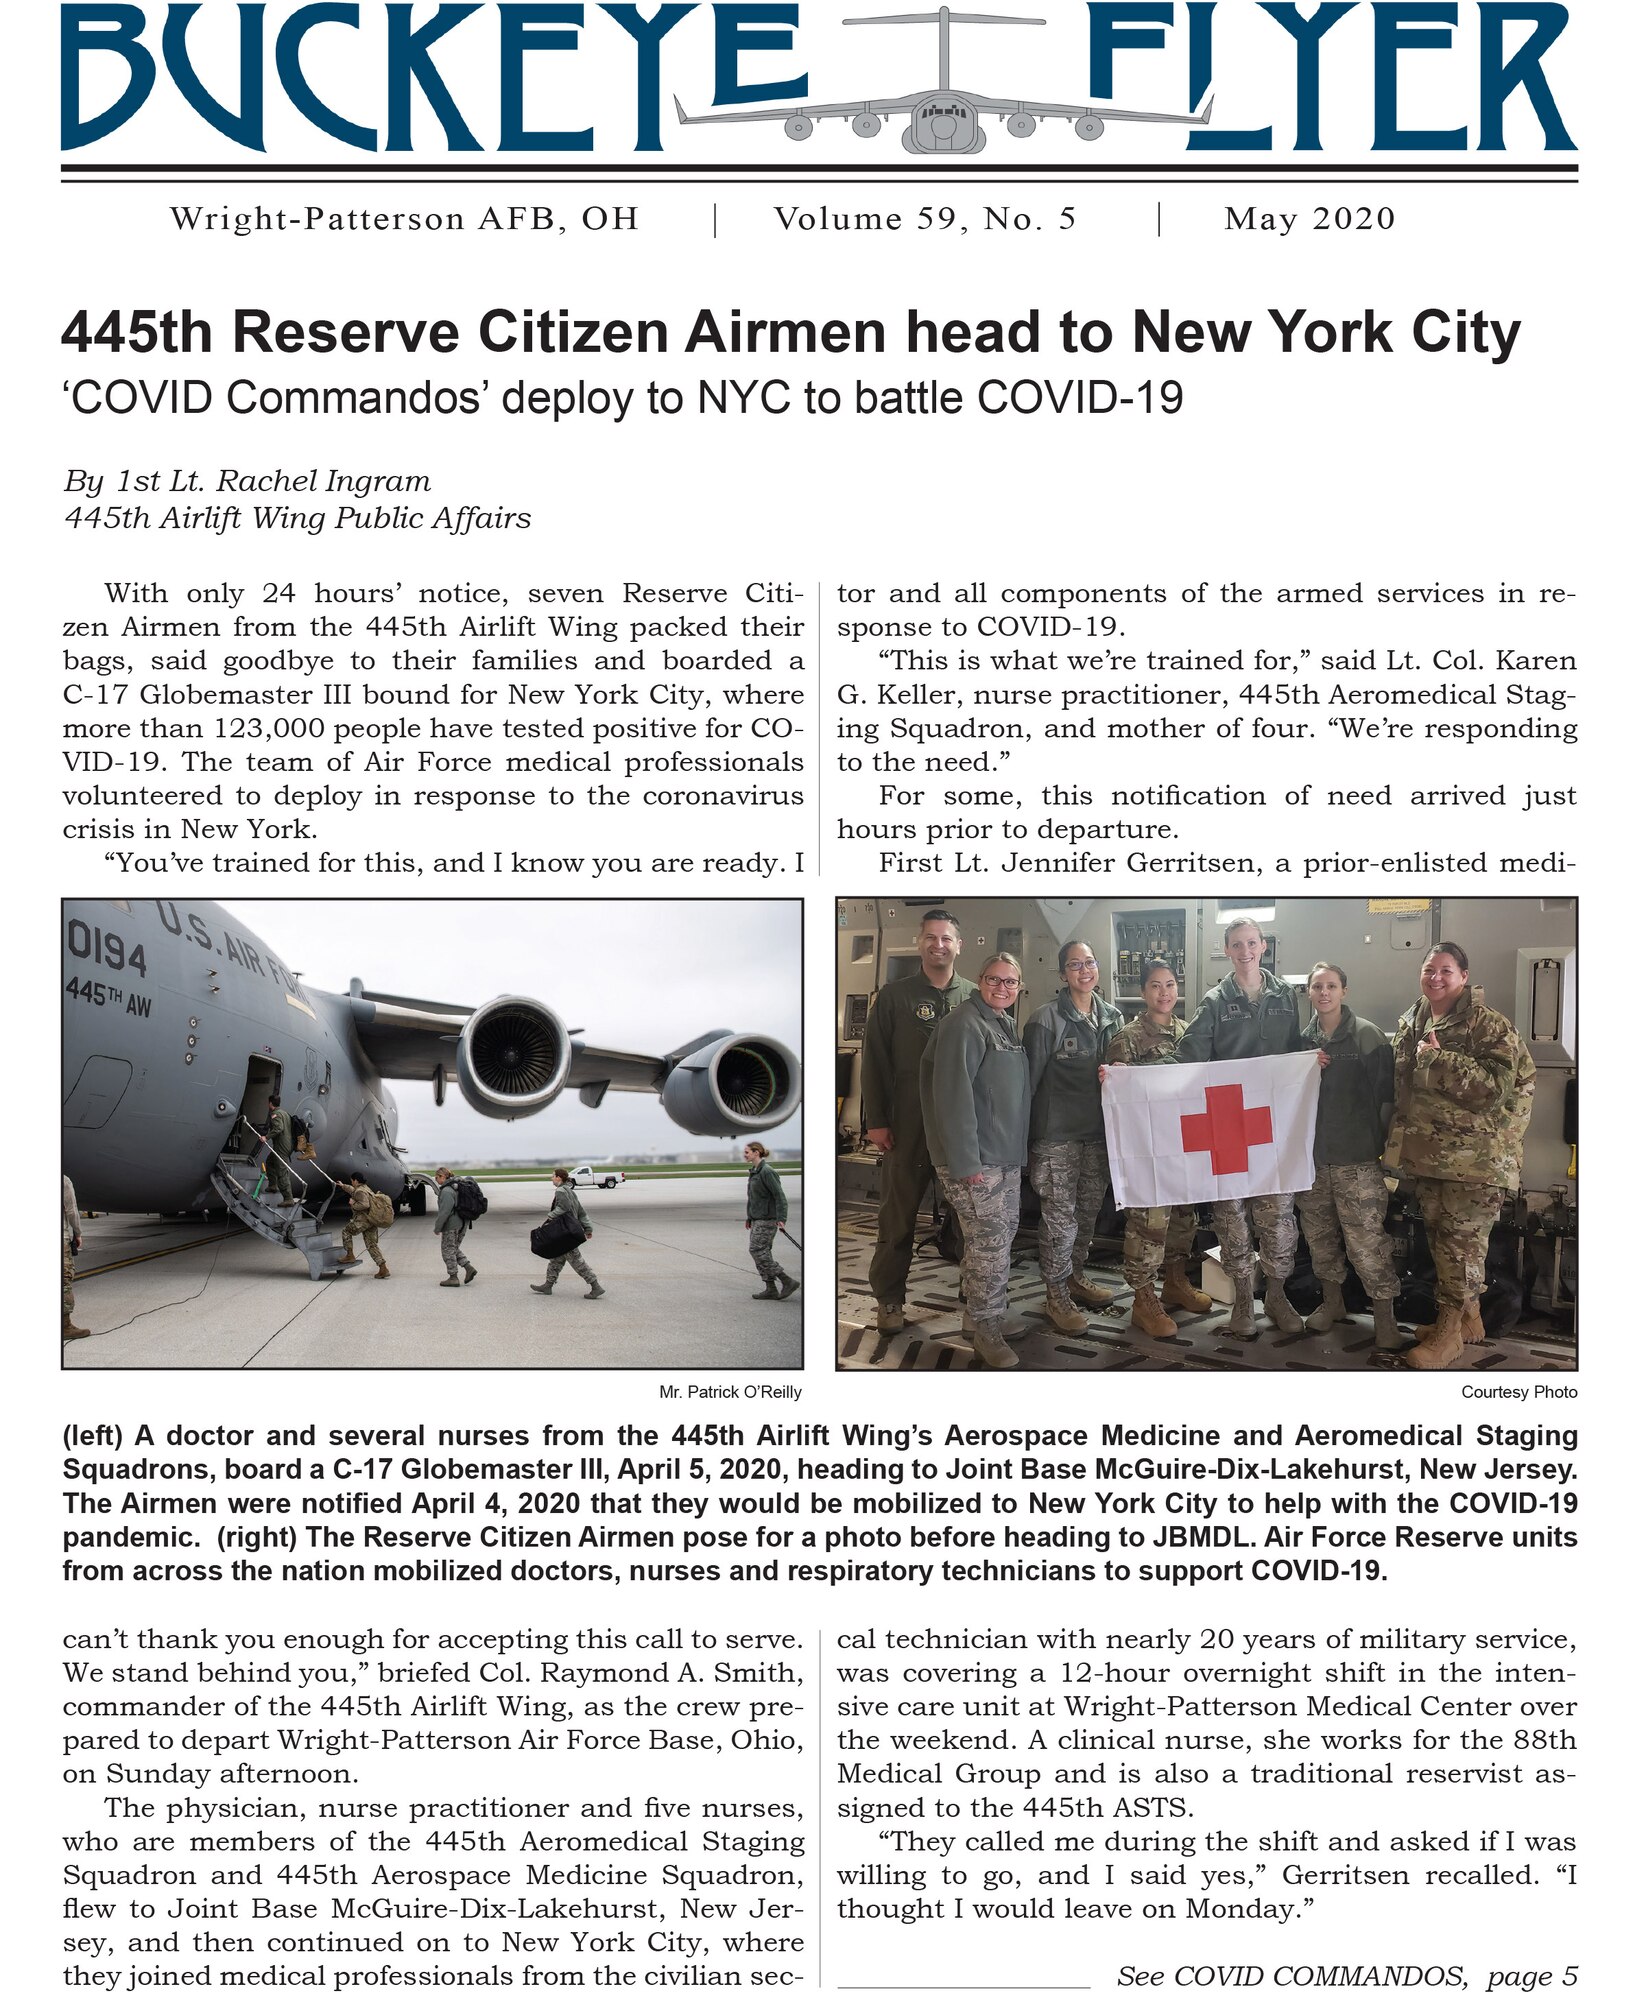 The May 2020 issue of the Buckeye Flyer is now available. The official publication of the 445th Airlift Wing includes eight pages of stories, photos and features pertaining to the 445th Airlift Wing, Air Force Reserve Command and the U.S. Air Force.